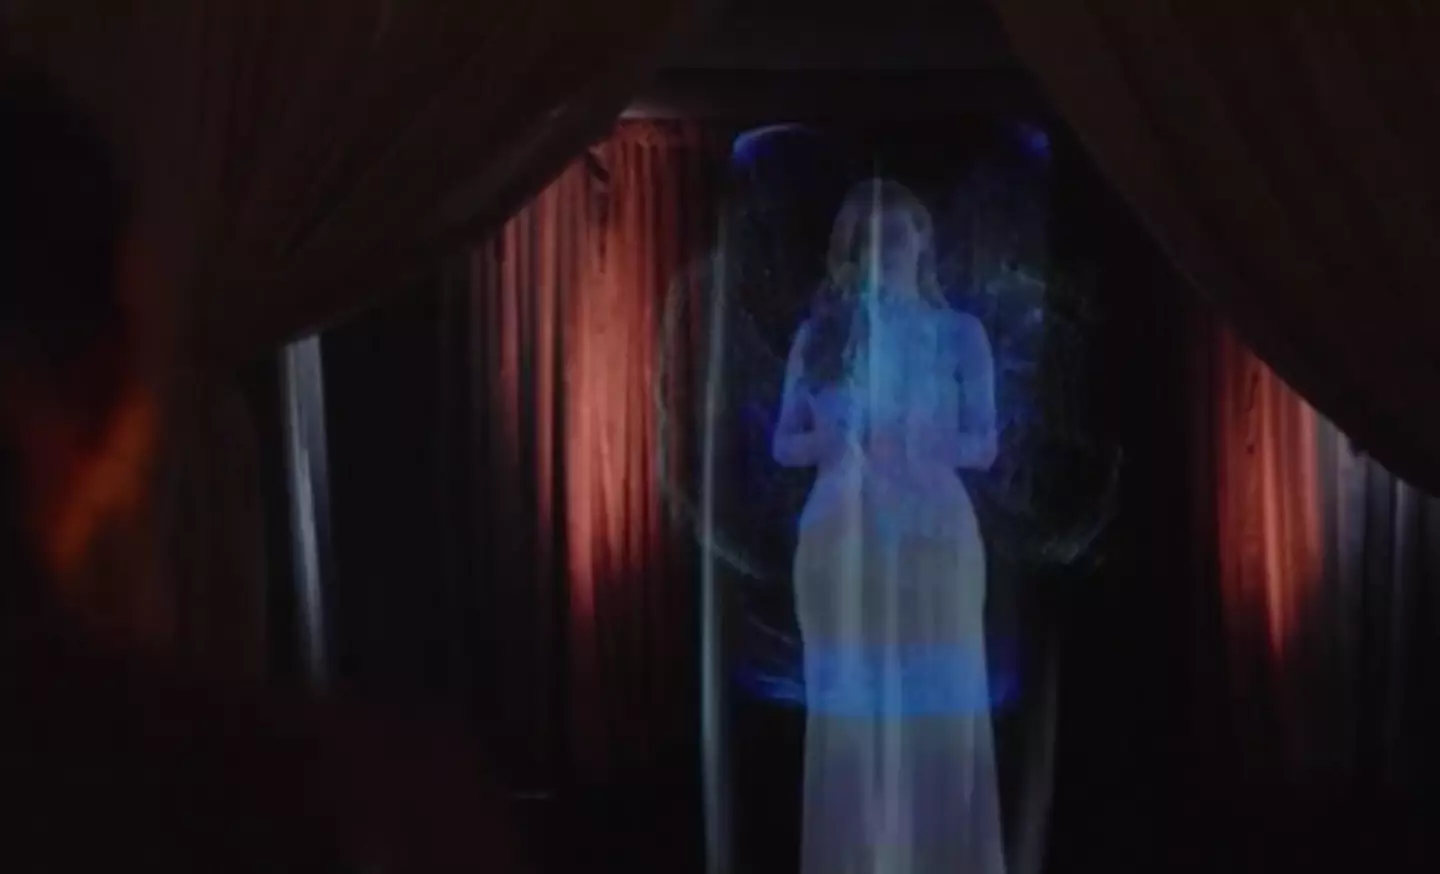 Sarah appeared as a hologram (